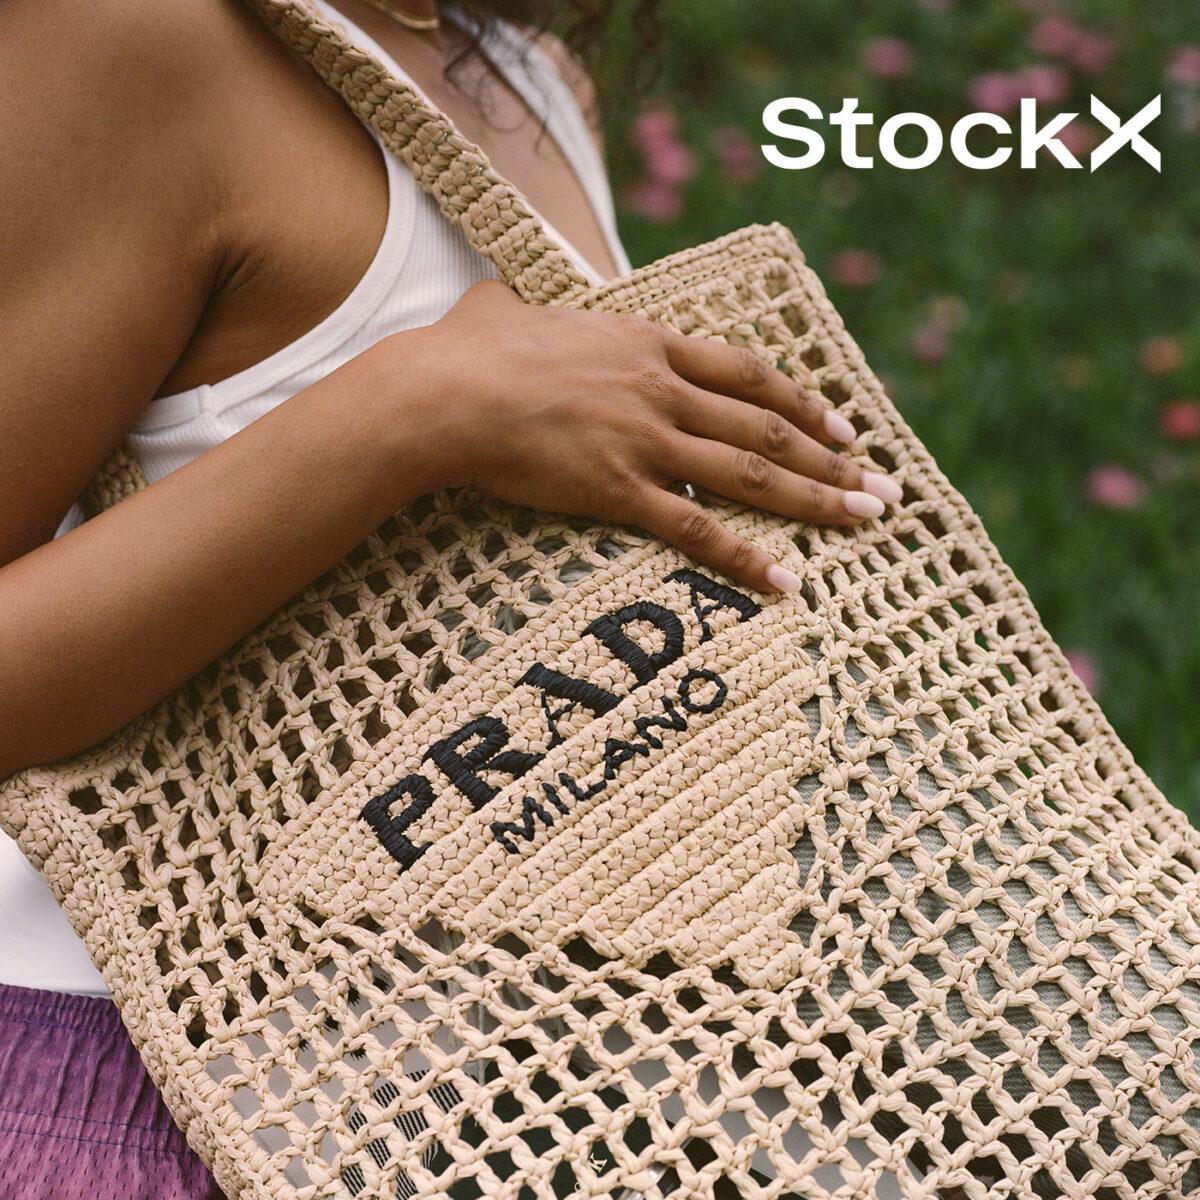 Cozy Bags Are One of the Biggest Trends of the Season - StockX News